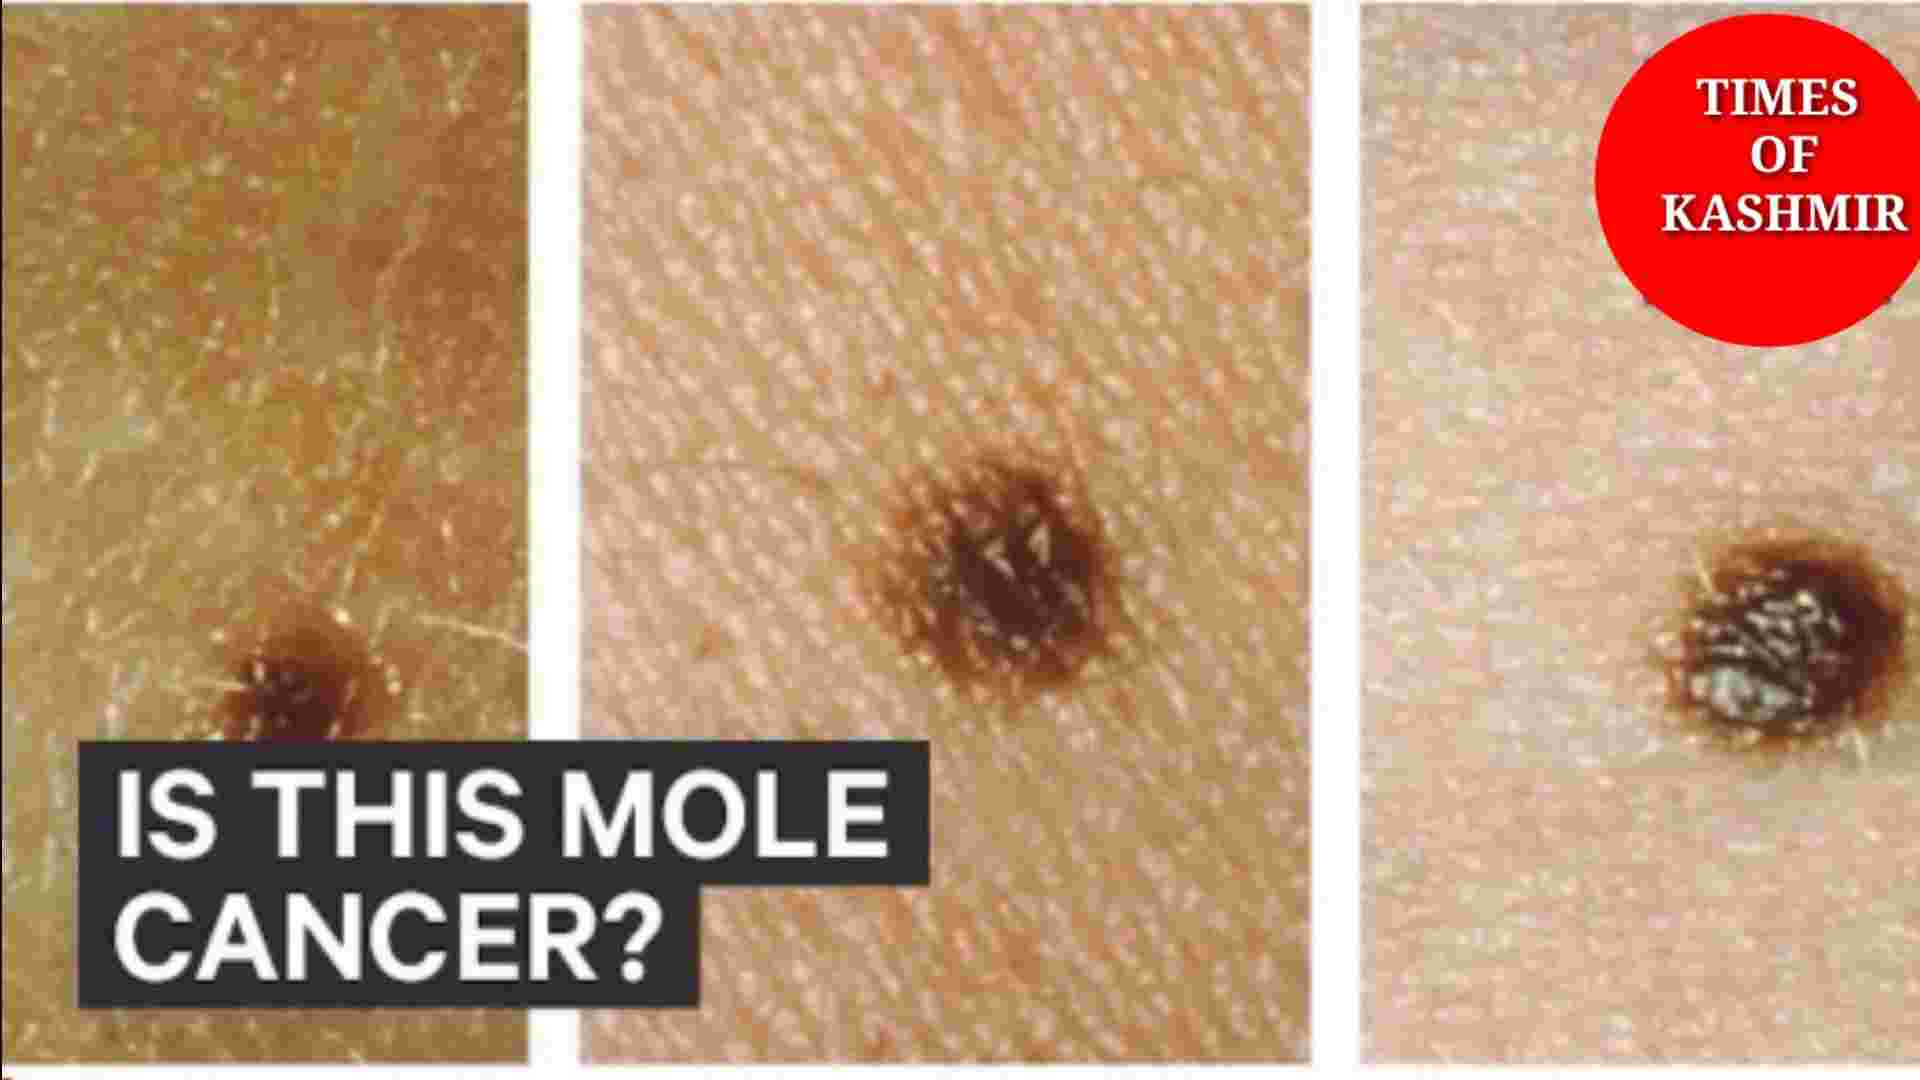 Cancerous moles: How to Get Rid of Moles on Skin